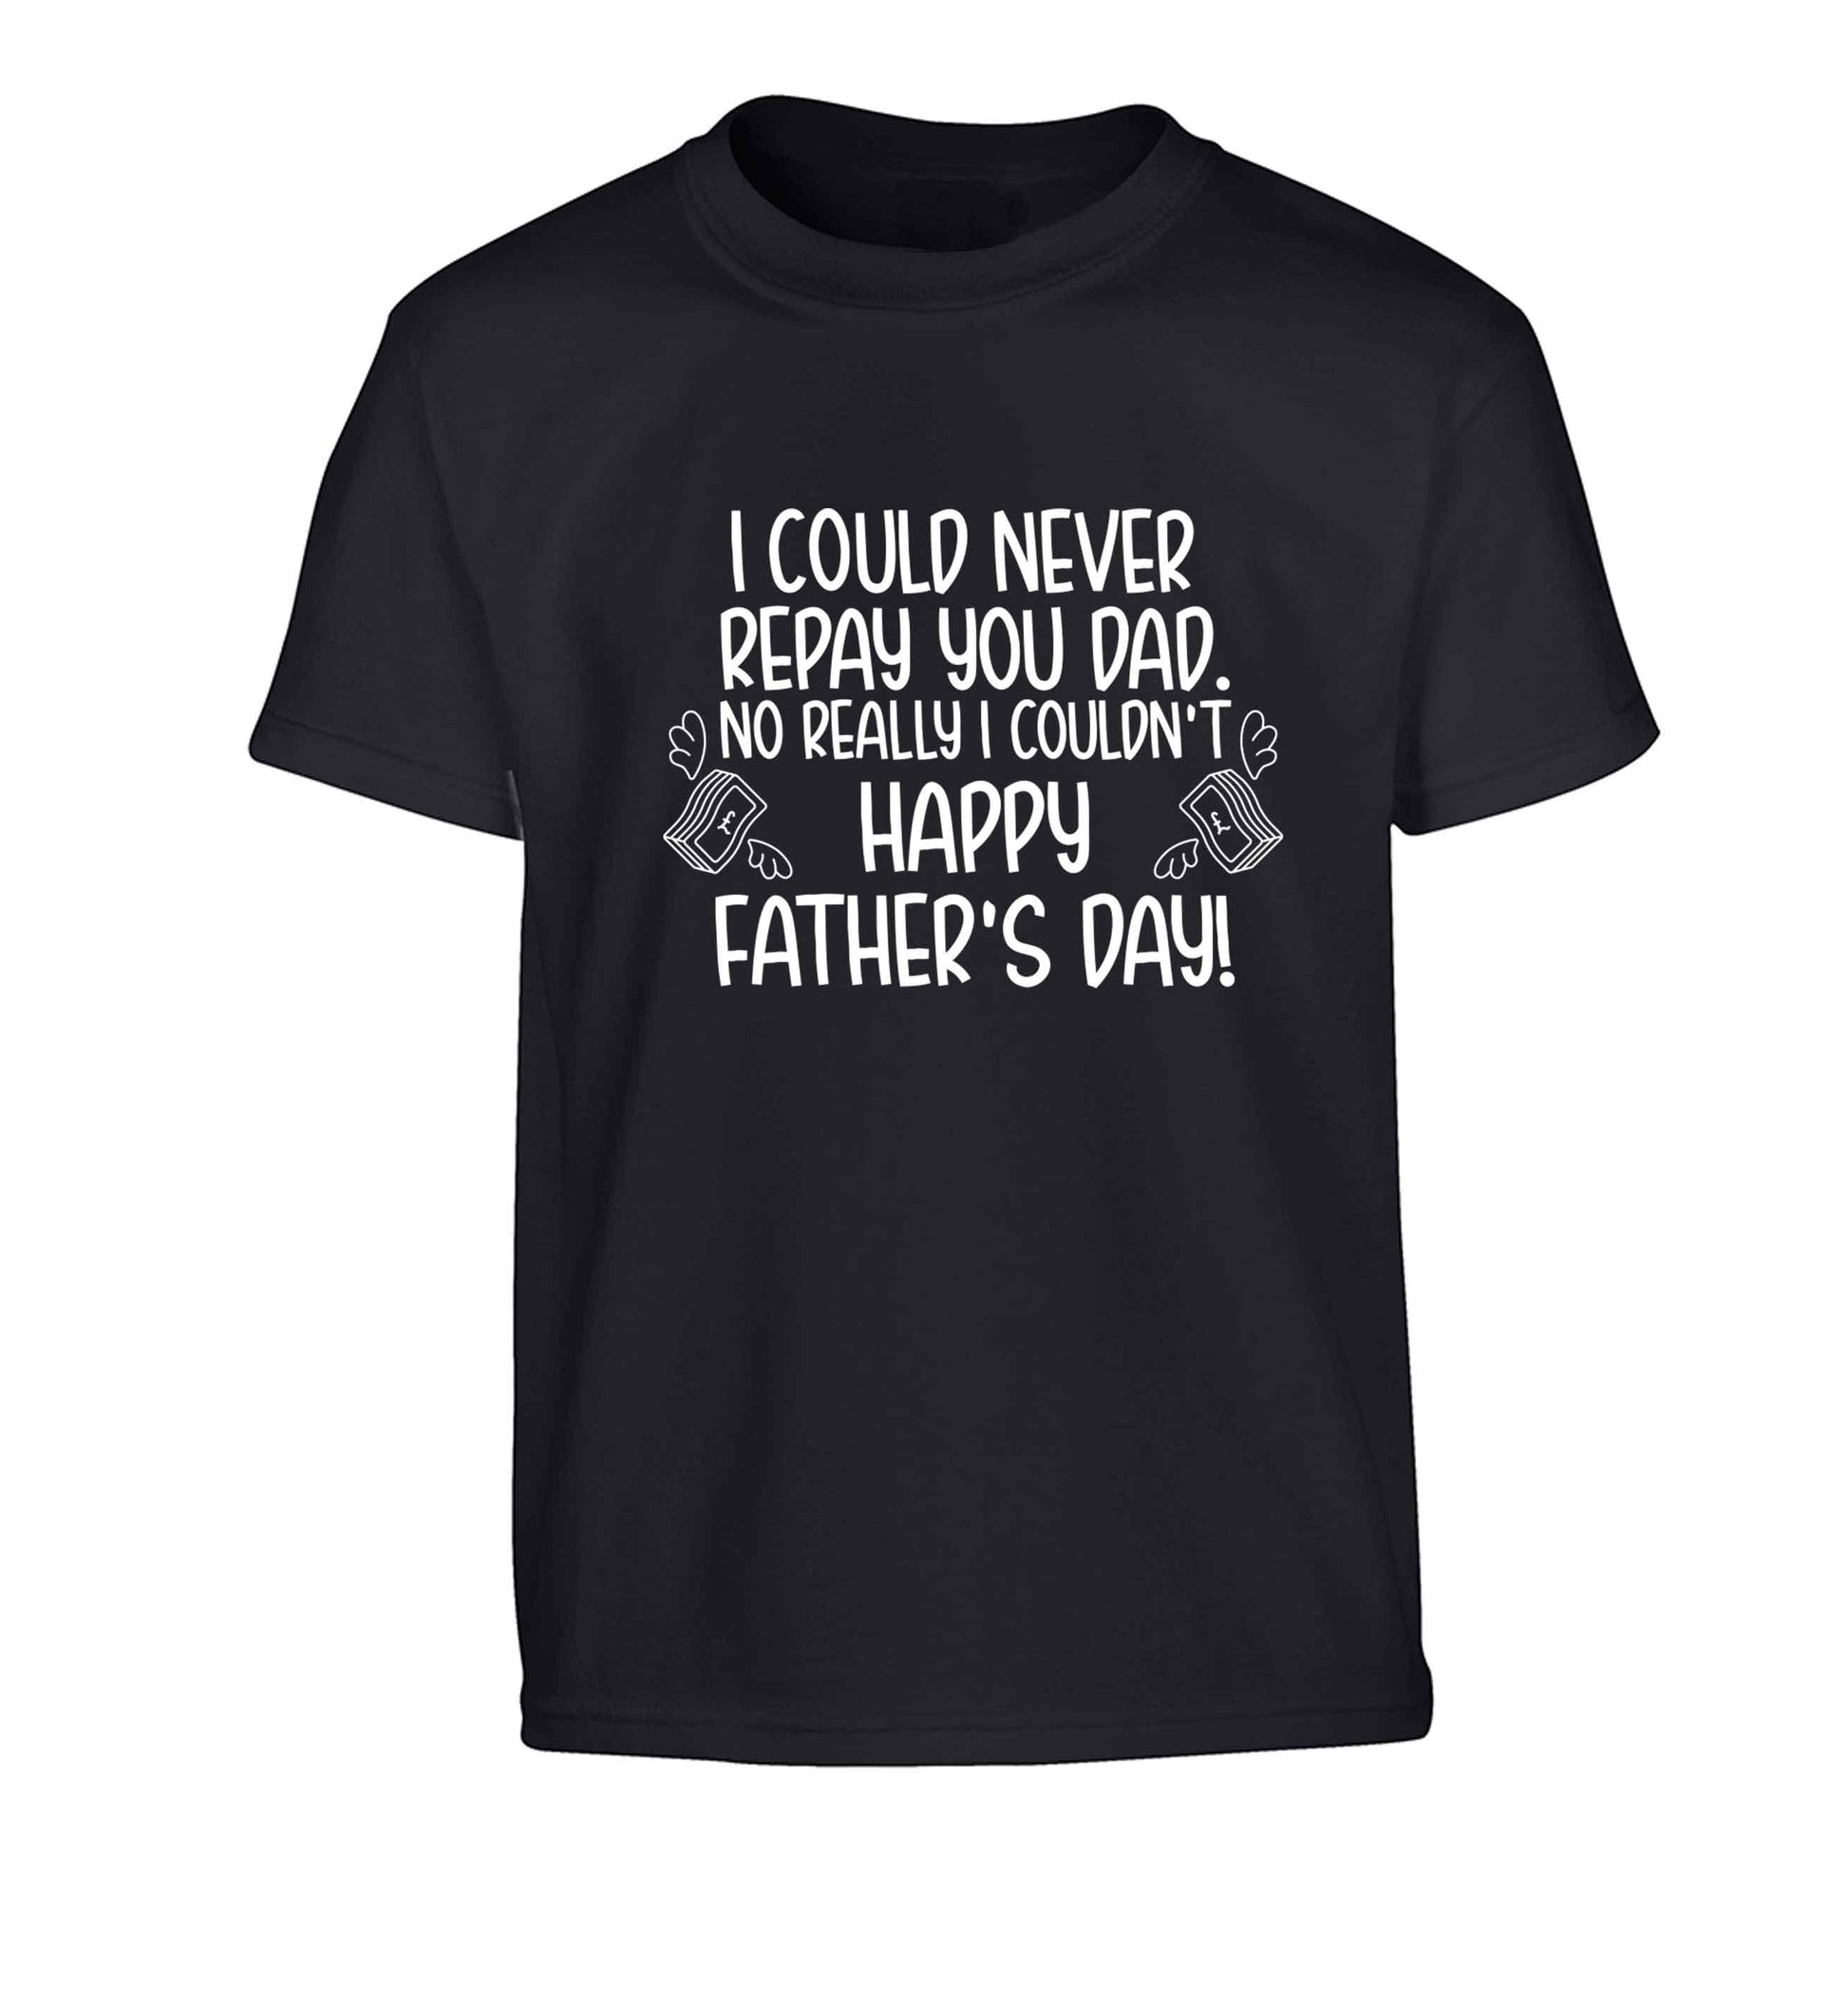 I could never repay you dad. No I really couldn't happy Father's day! Children's black Tshirt 12-13 Years